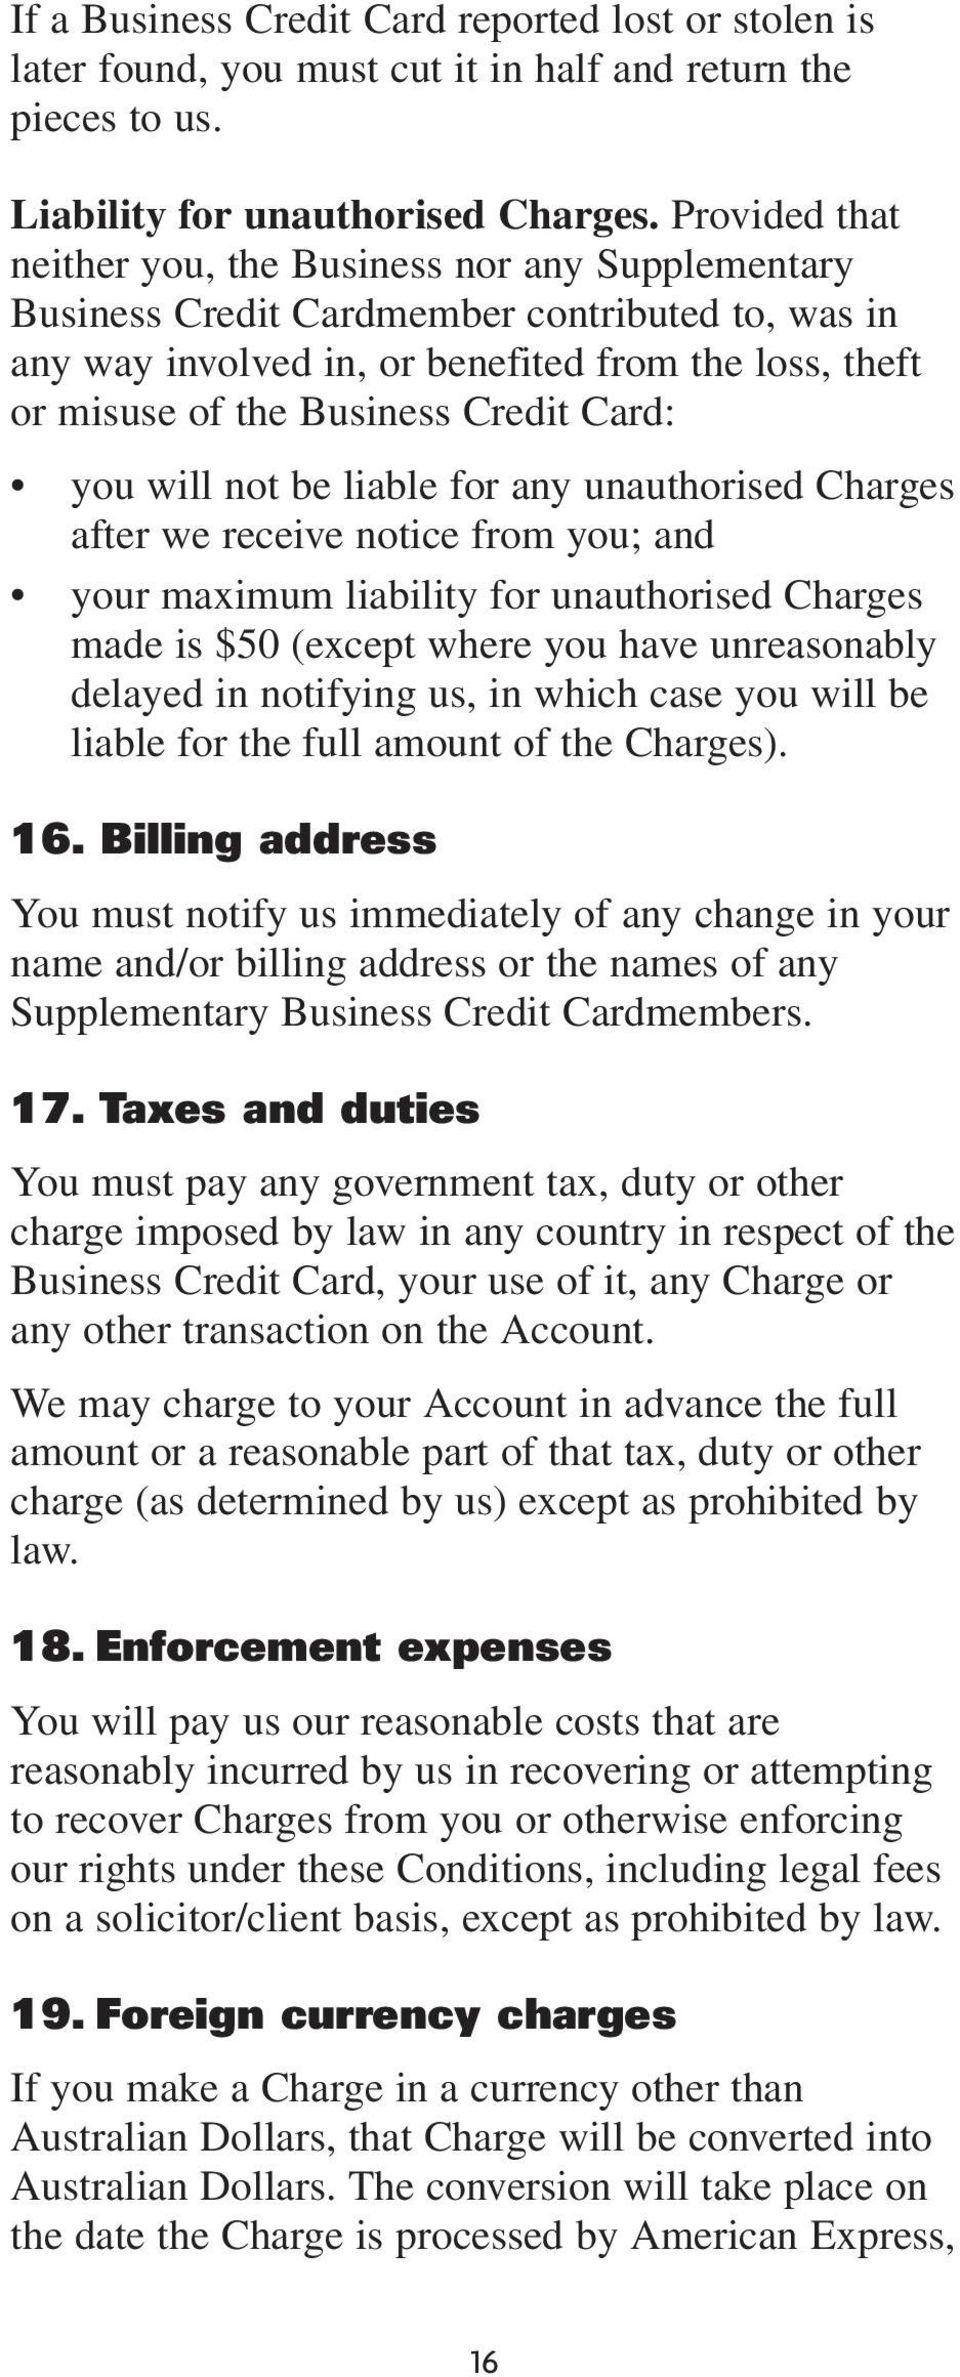 Card: you will not be liable for any unauthorised Charges after we receive notice from you; and your maximum liability for unauthorised Charges made is $50 (except where you have unreasonably delayed